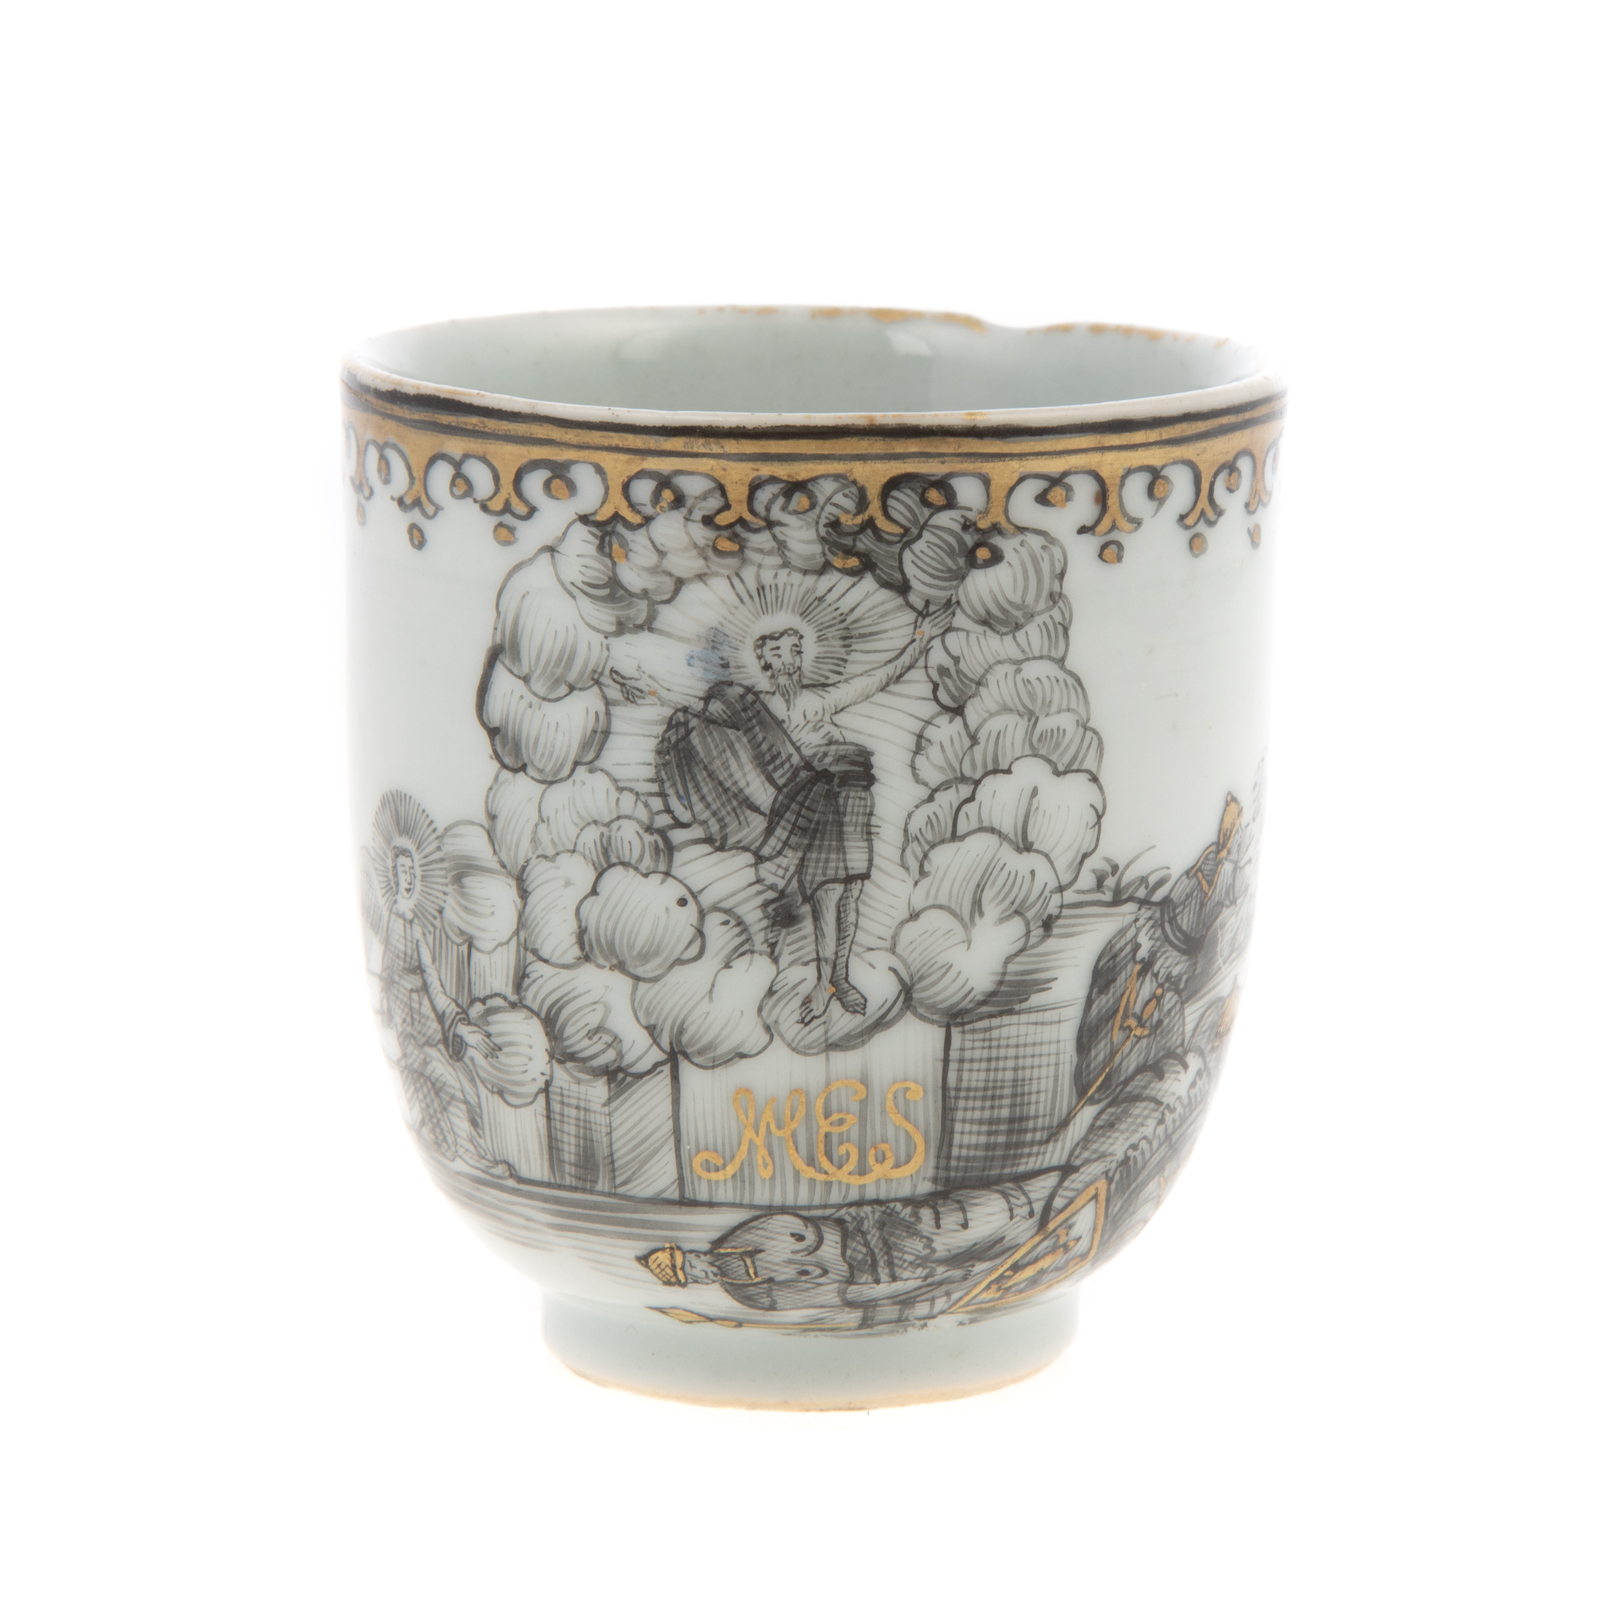 CHINESE EXPORT JESUIT WARE TEACUP 36a02c